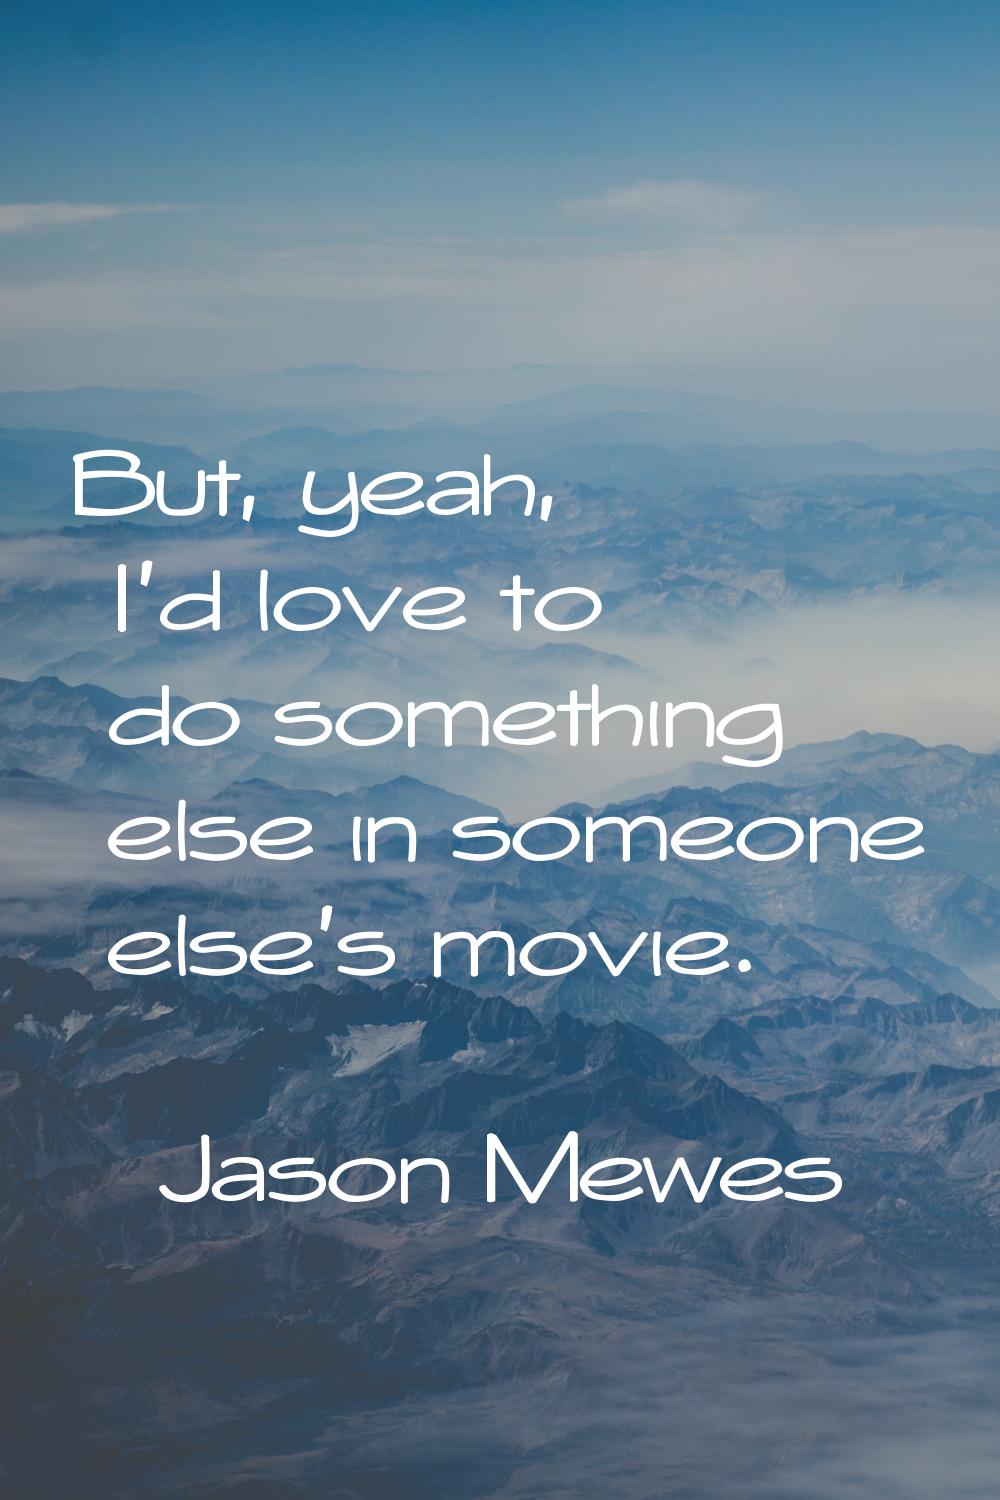 But, yeah, I'd love to do something else in someone else's movie.